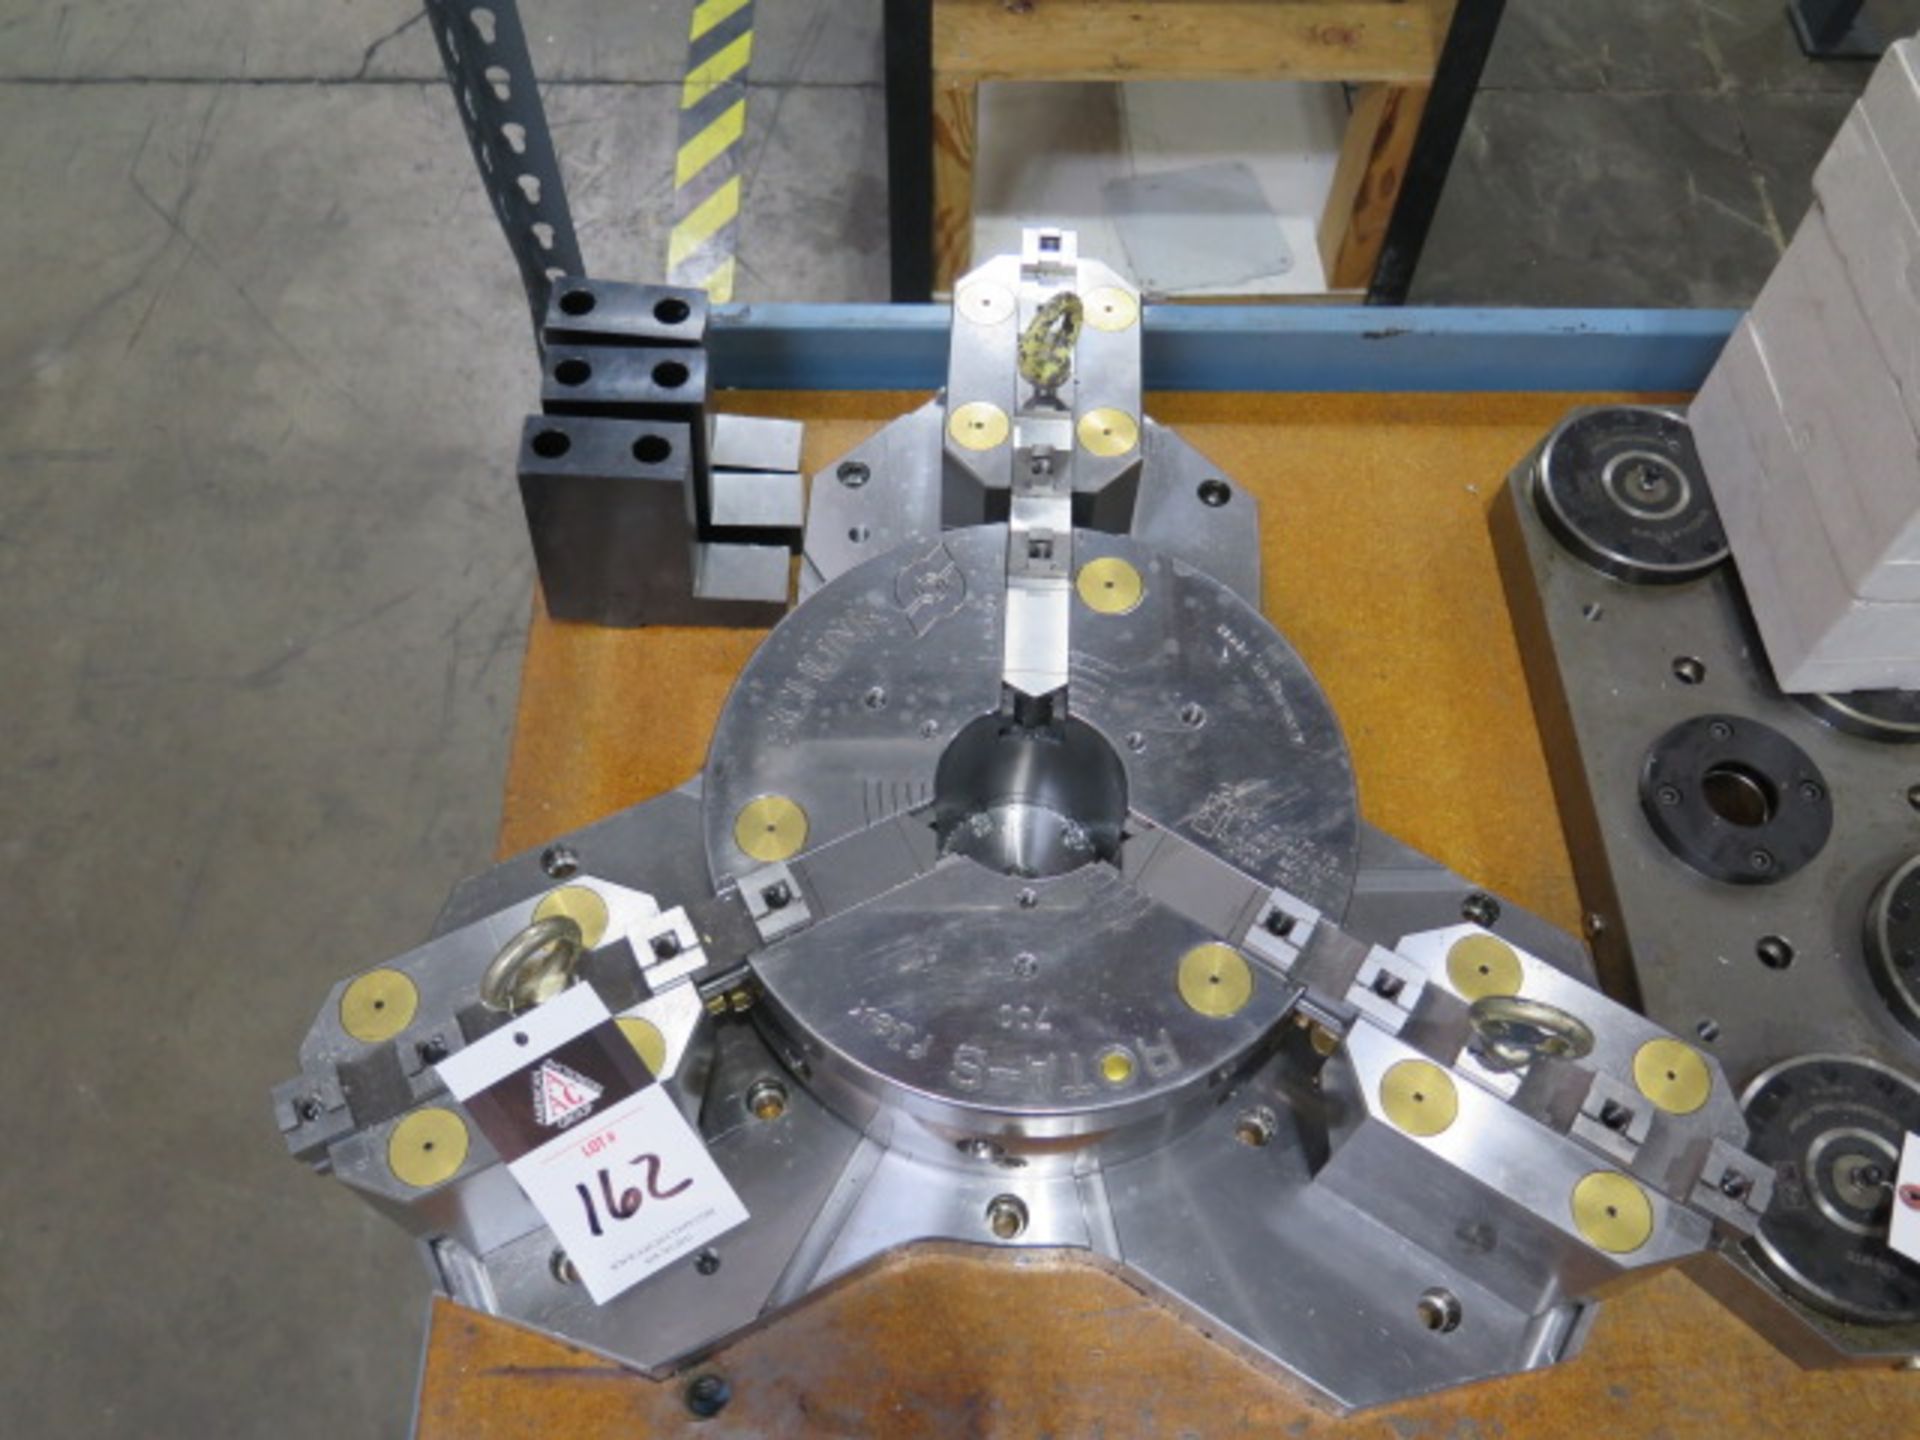 Shunk “ROTA-S flex 700” 31” 3-Jaw Chuck w/ Mounting Base (SOLD AS-IS - NO WARRANTY) - Image 2 of 11